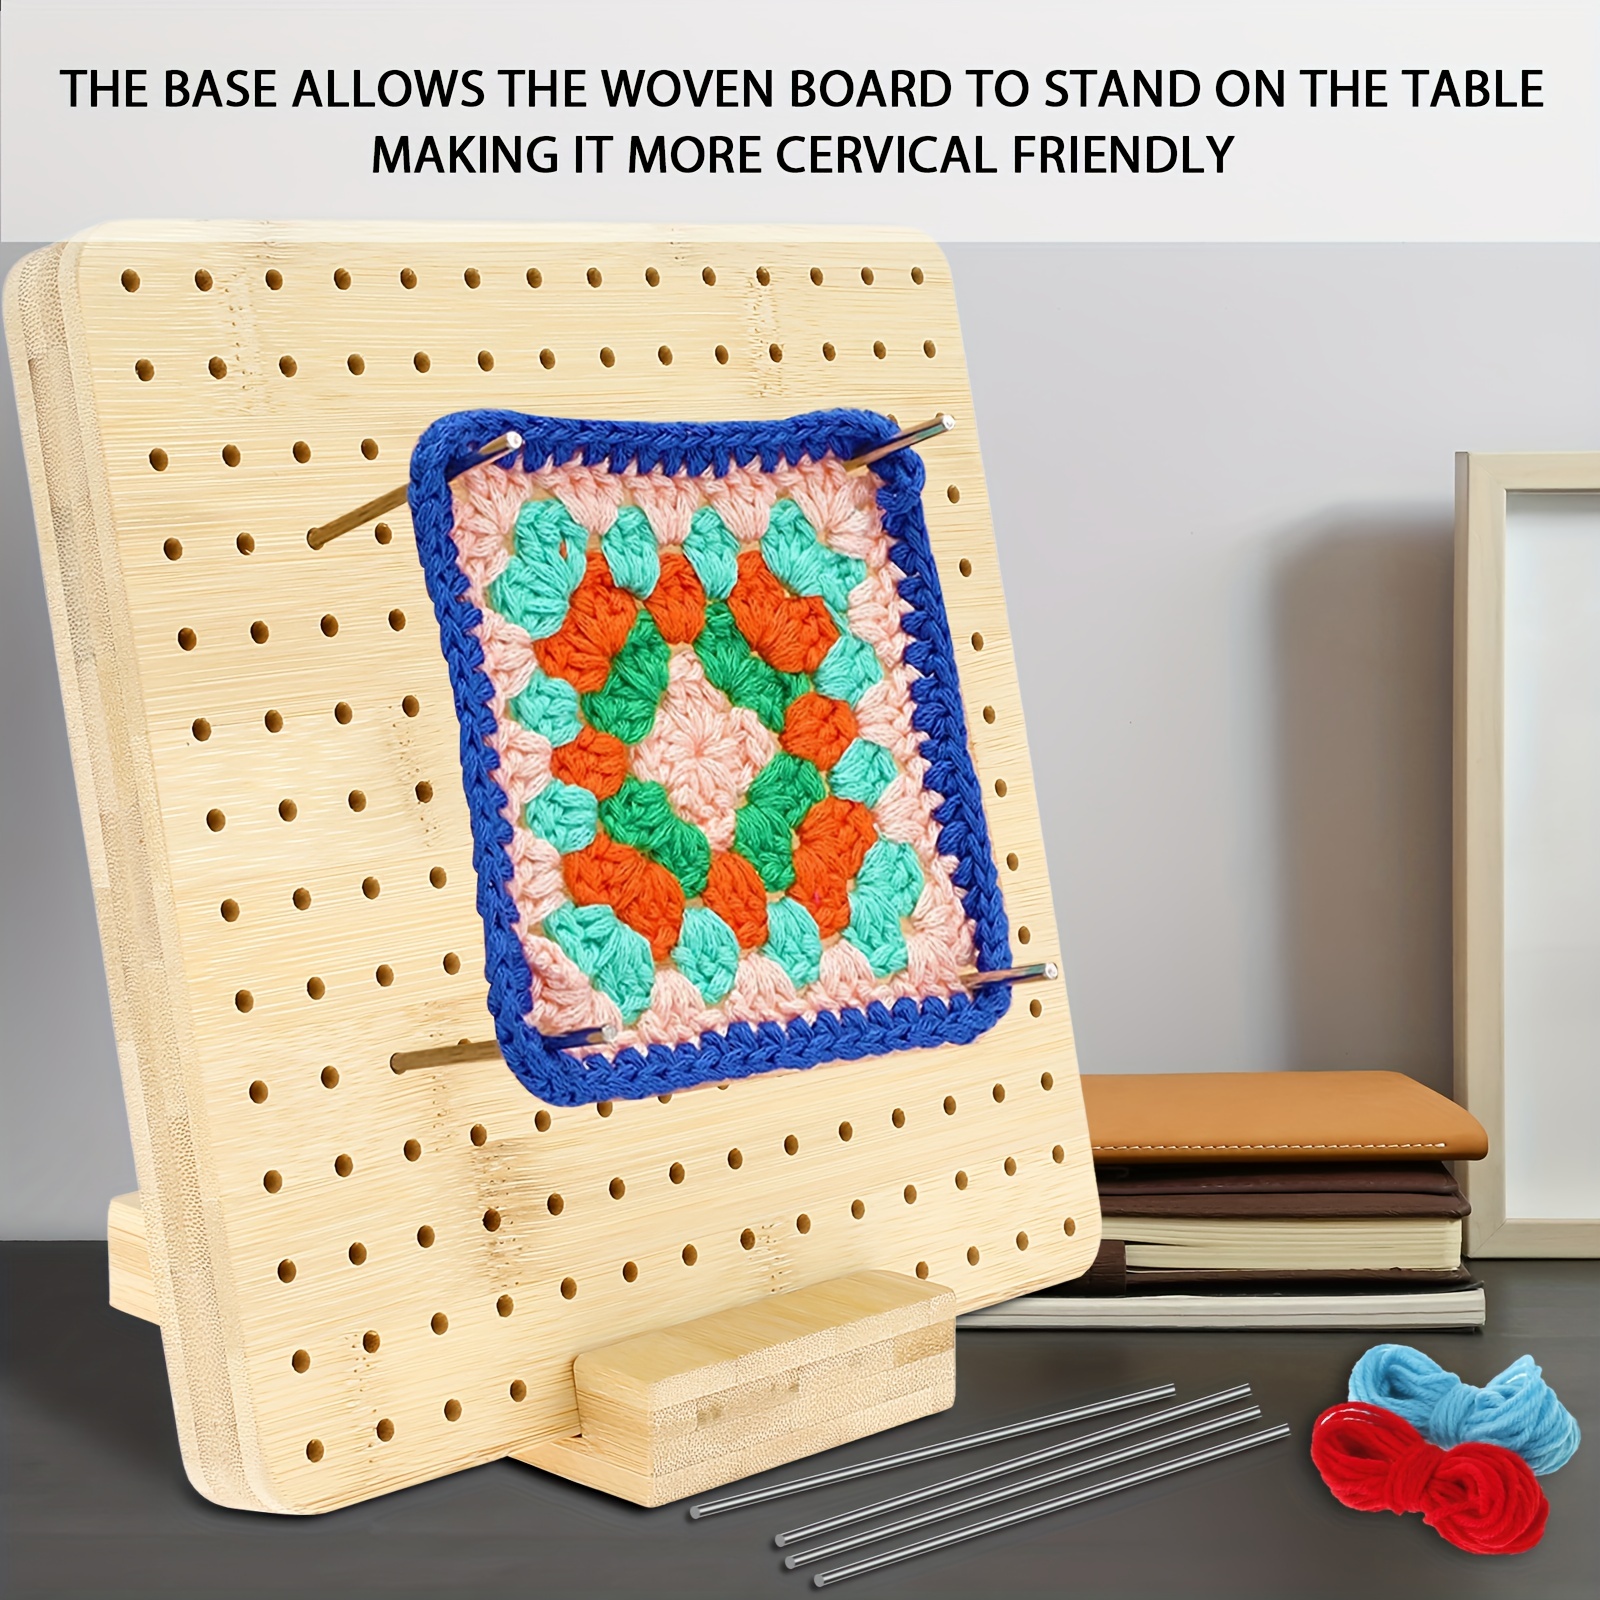 Comprar 7.8 Inches Bamboo Wooden Board for Knitting Crochet and